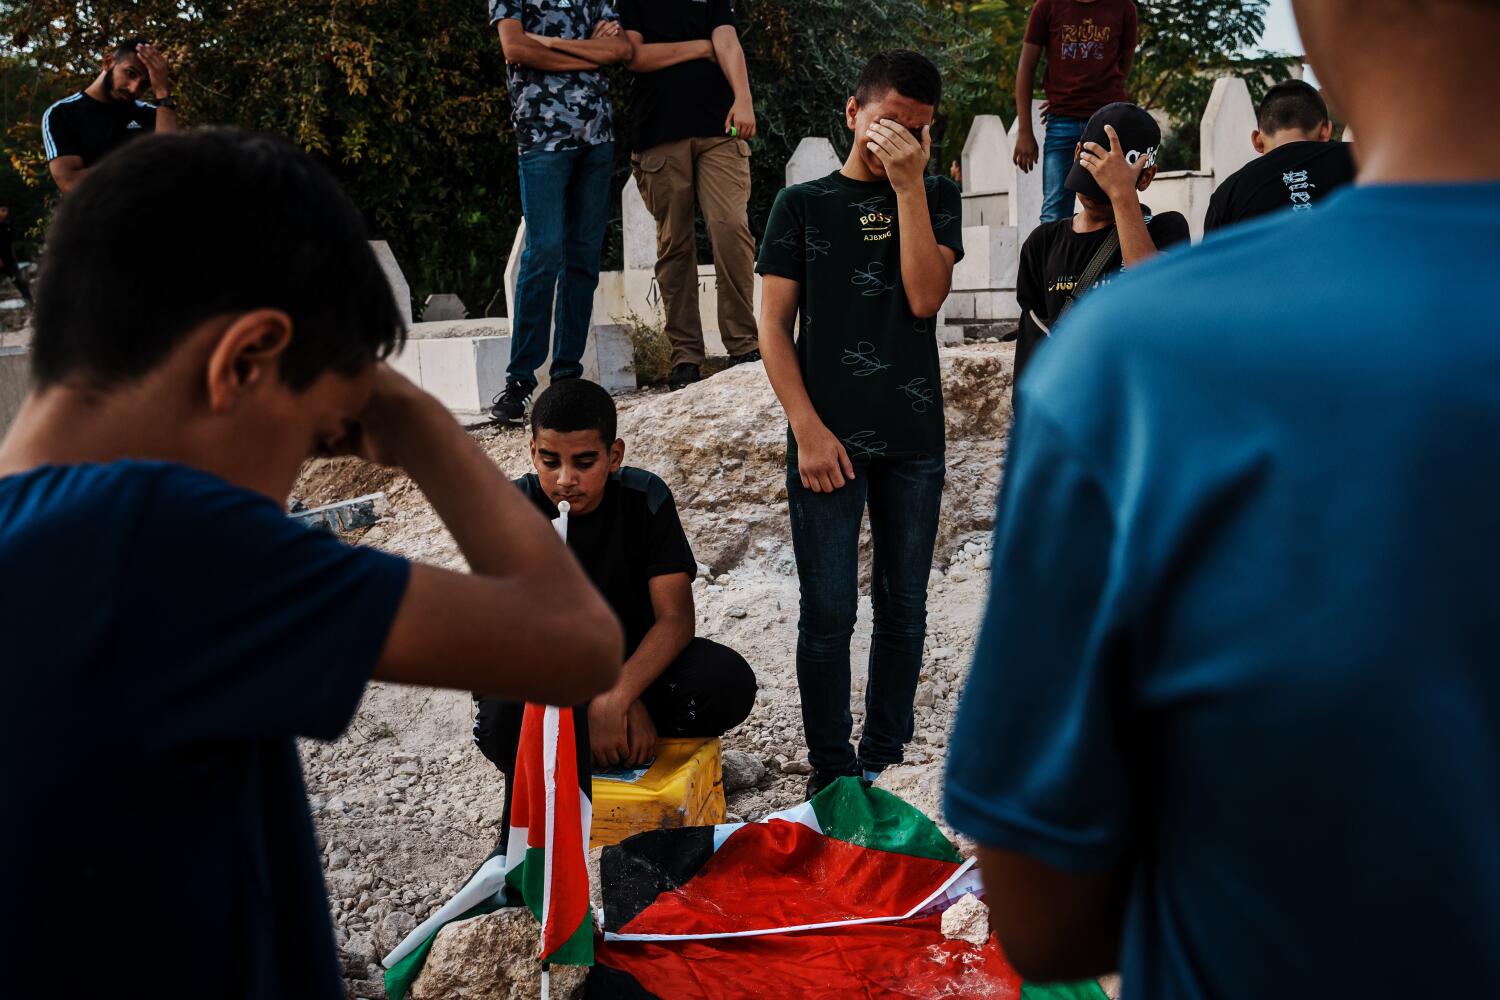 A stone, a bullet, a burial. A Palestinian boy's death in the West Bank signals wider unrest 